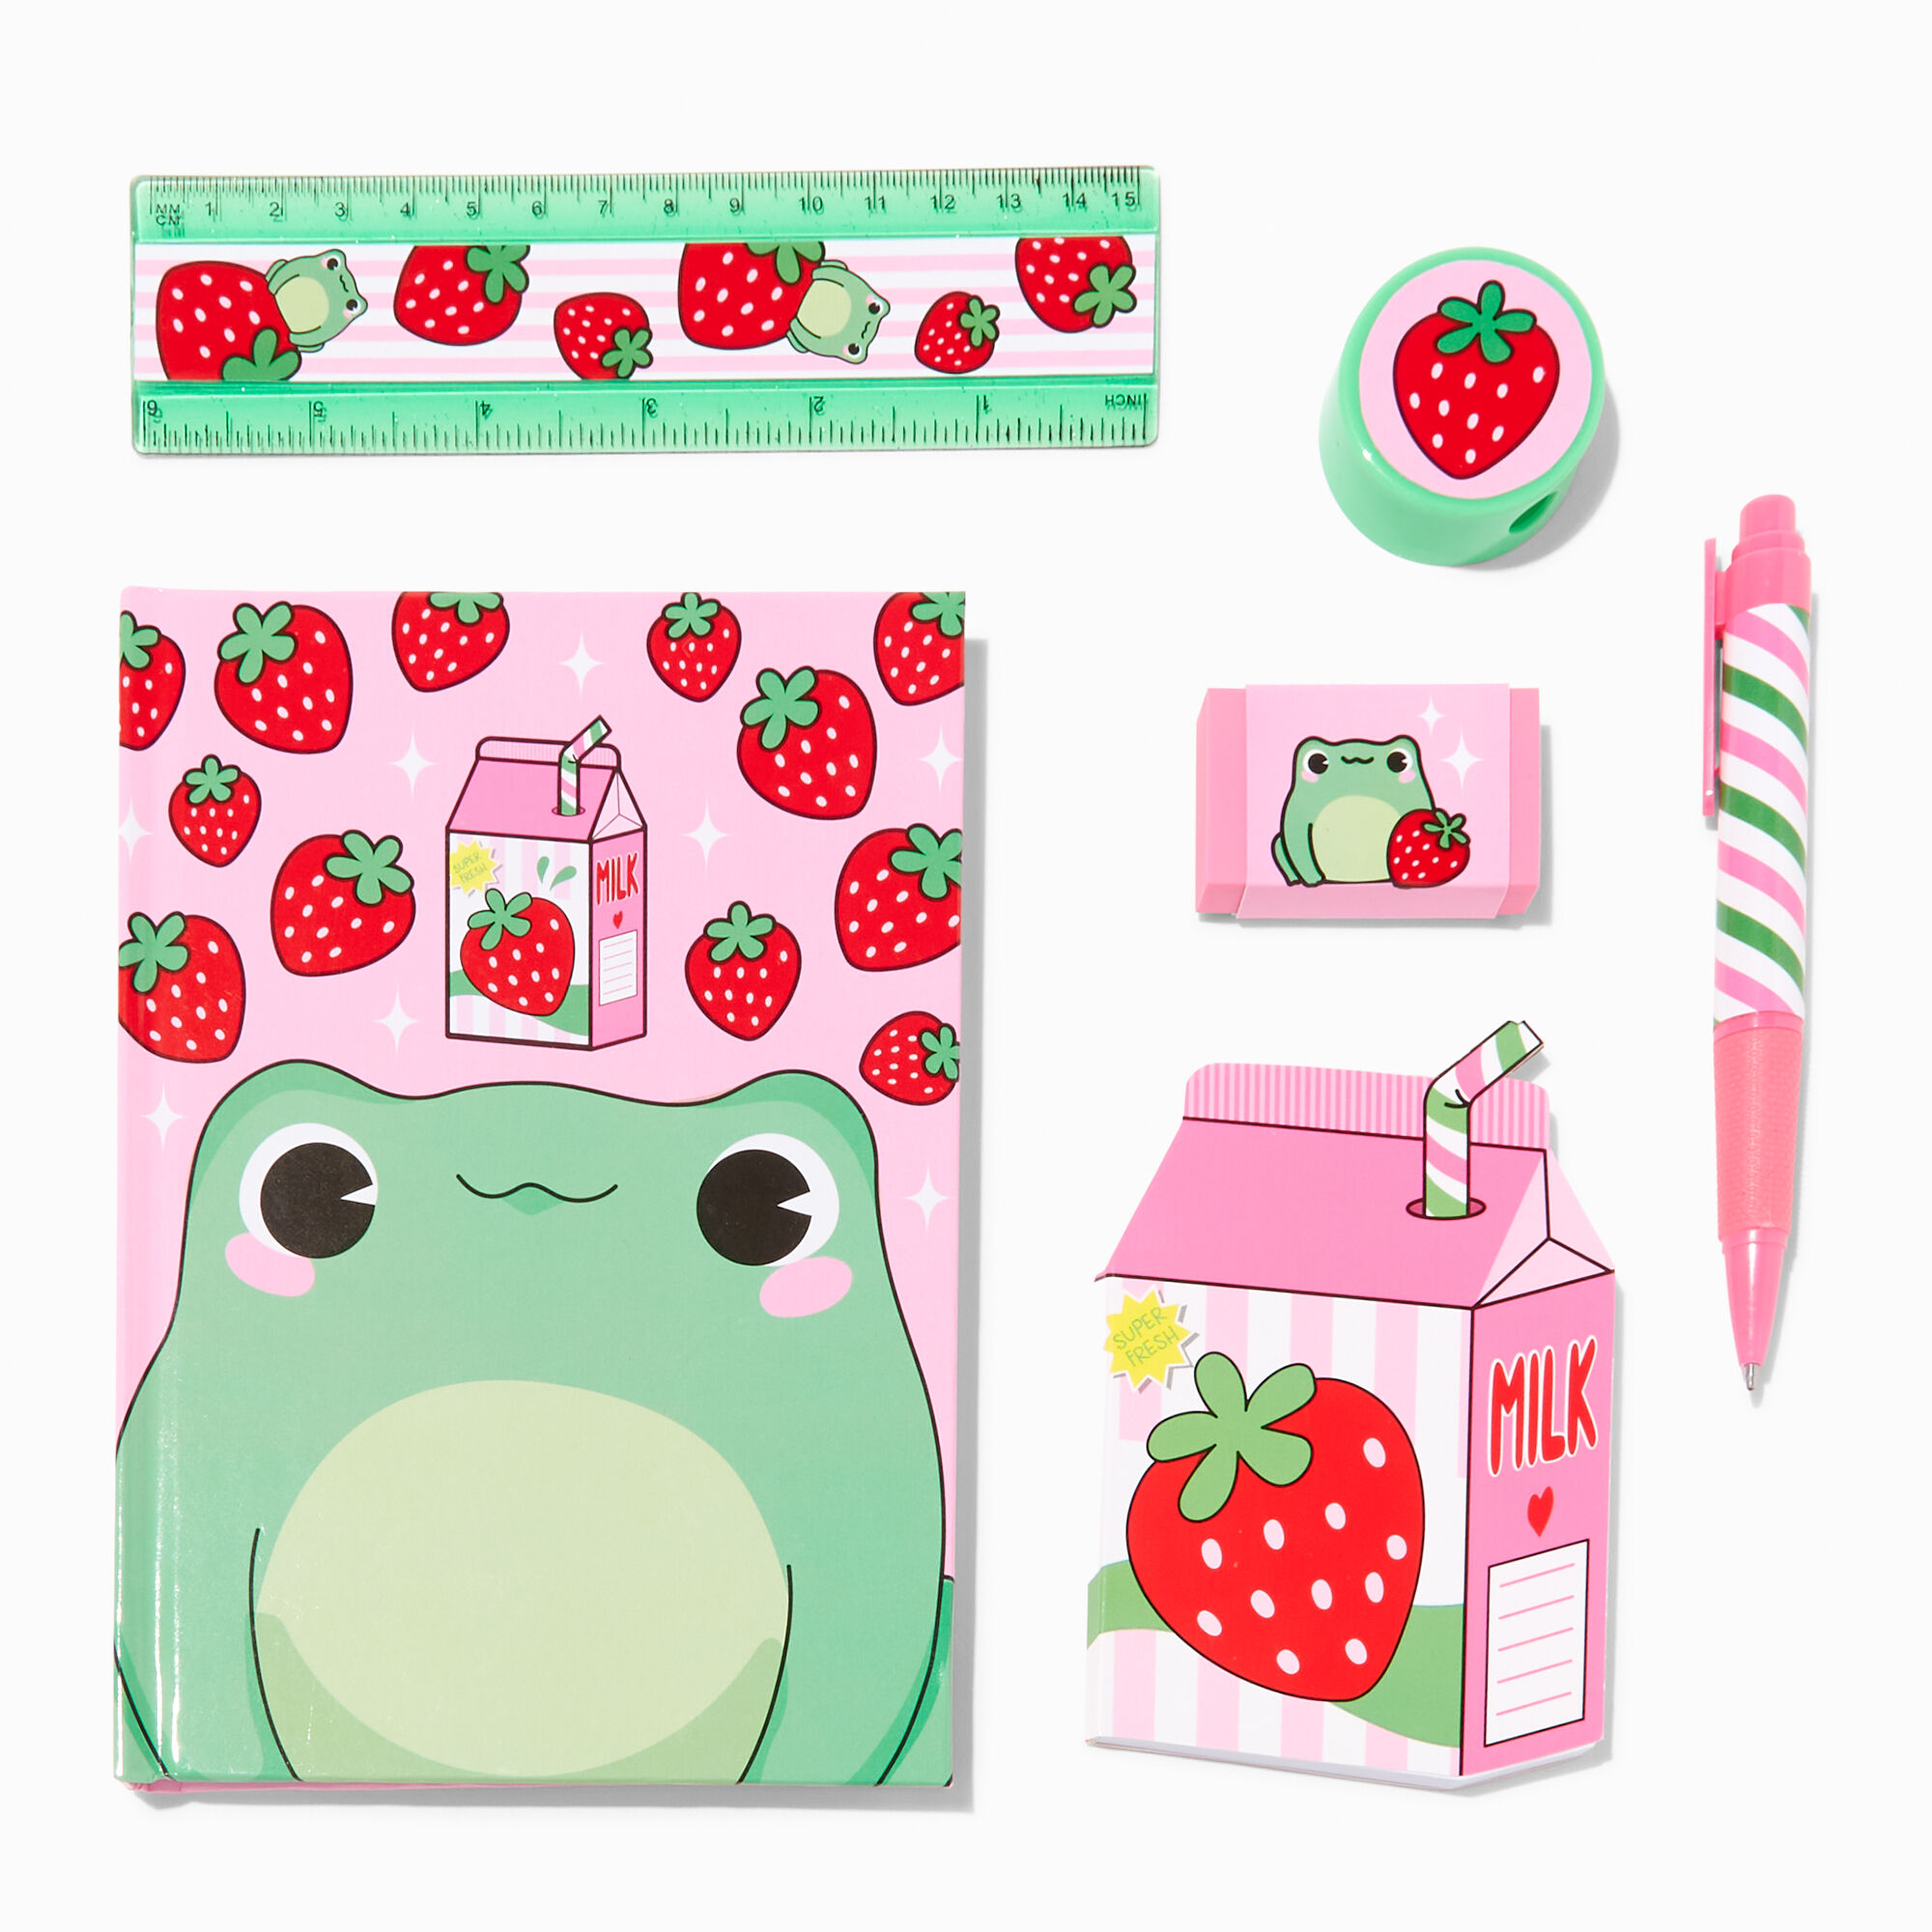 CUTE STATIONERY ITEMS FOR UNDER £5! - Colour with Claire